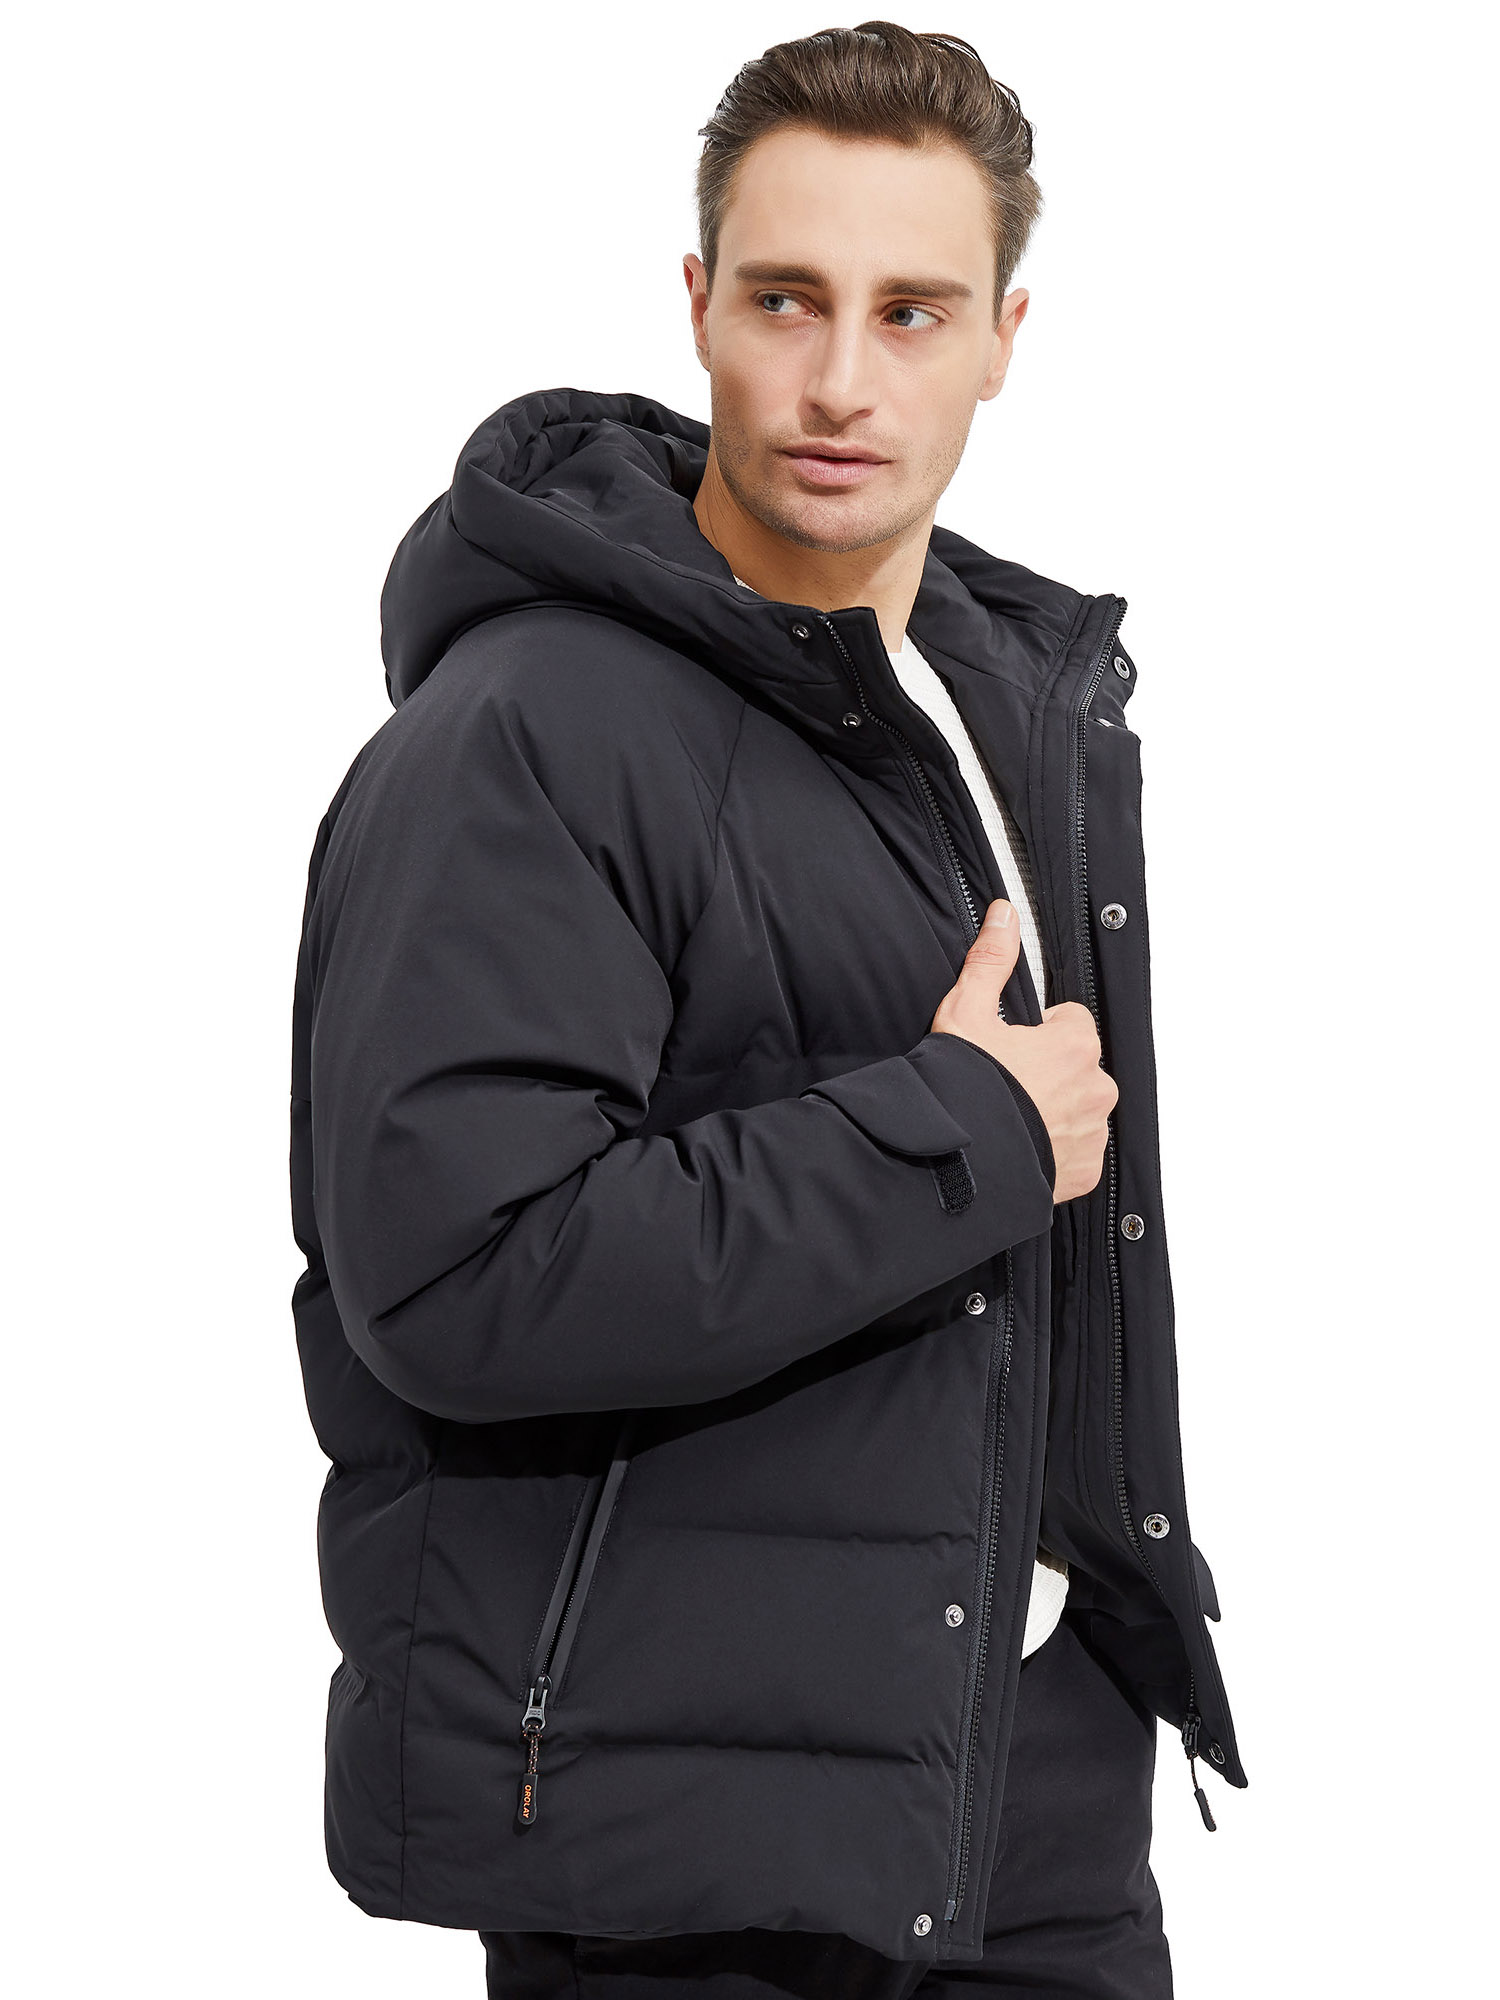 Orolay Men's Winter Down Jacket with Adjustable Drawstring Hood Ribbed Cuff - image 2 of 5